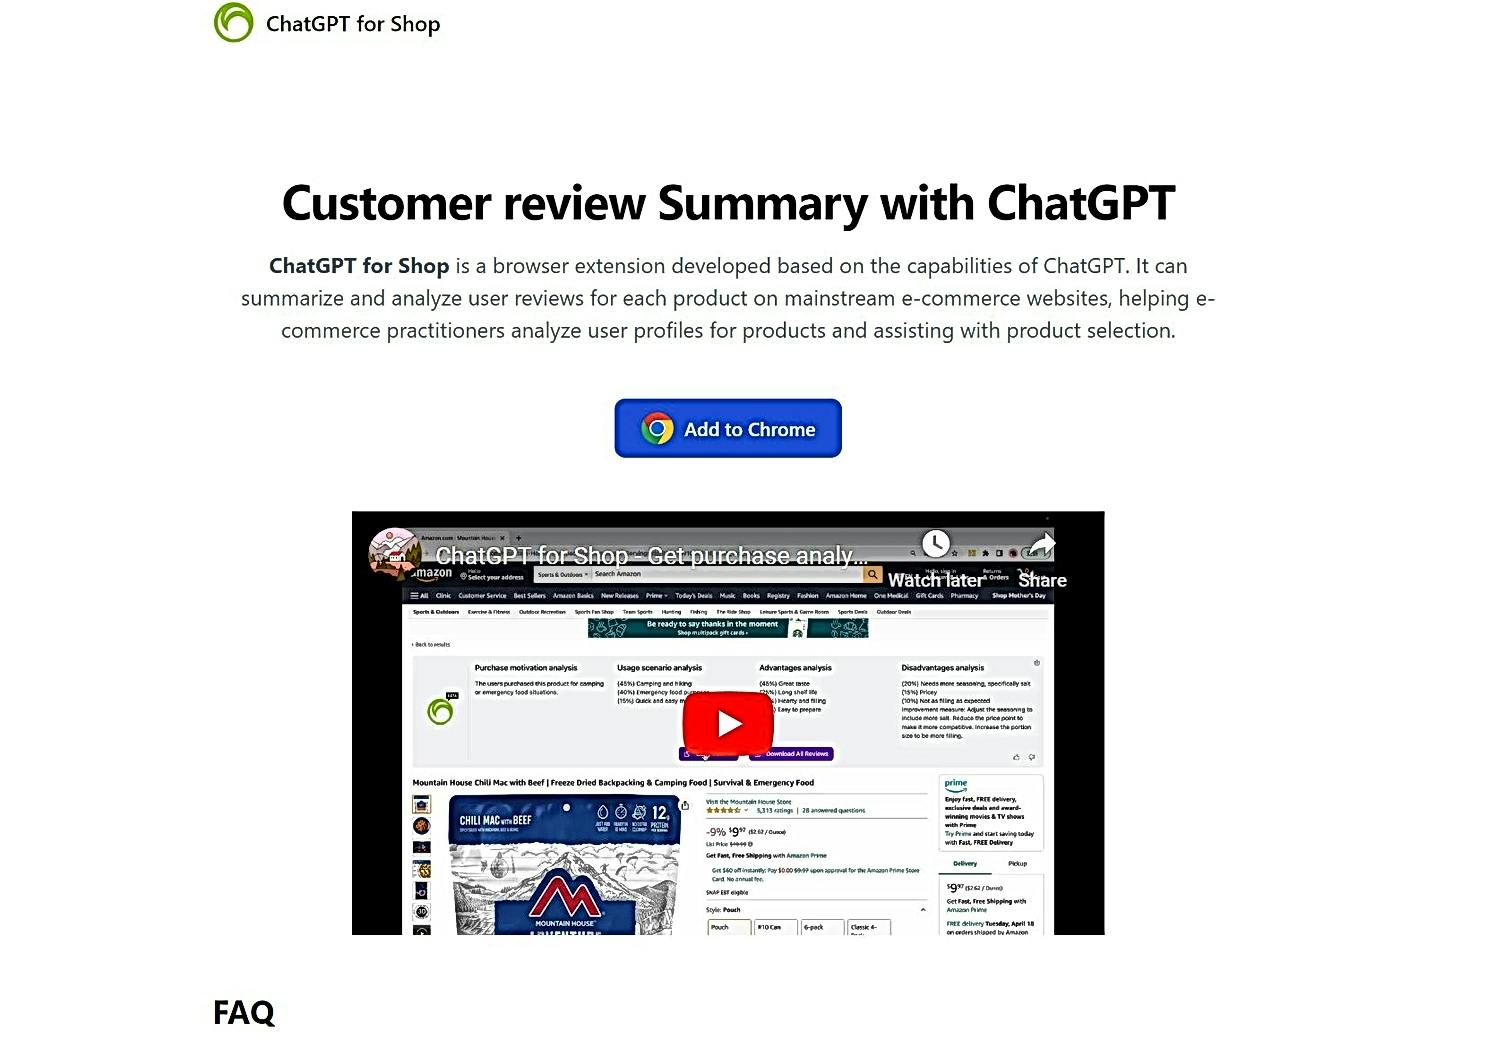 ChatGPT for Shop featured